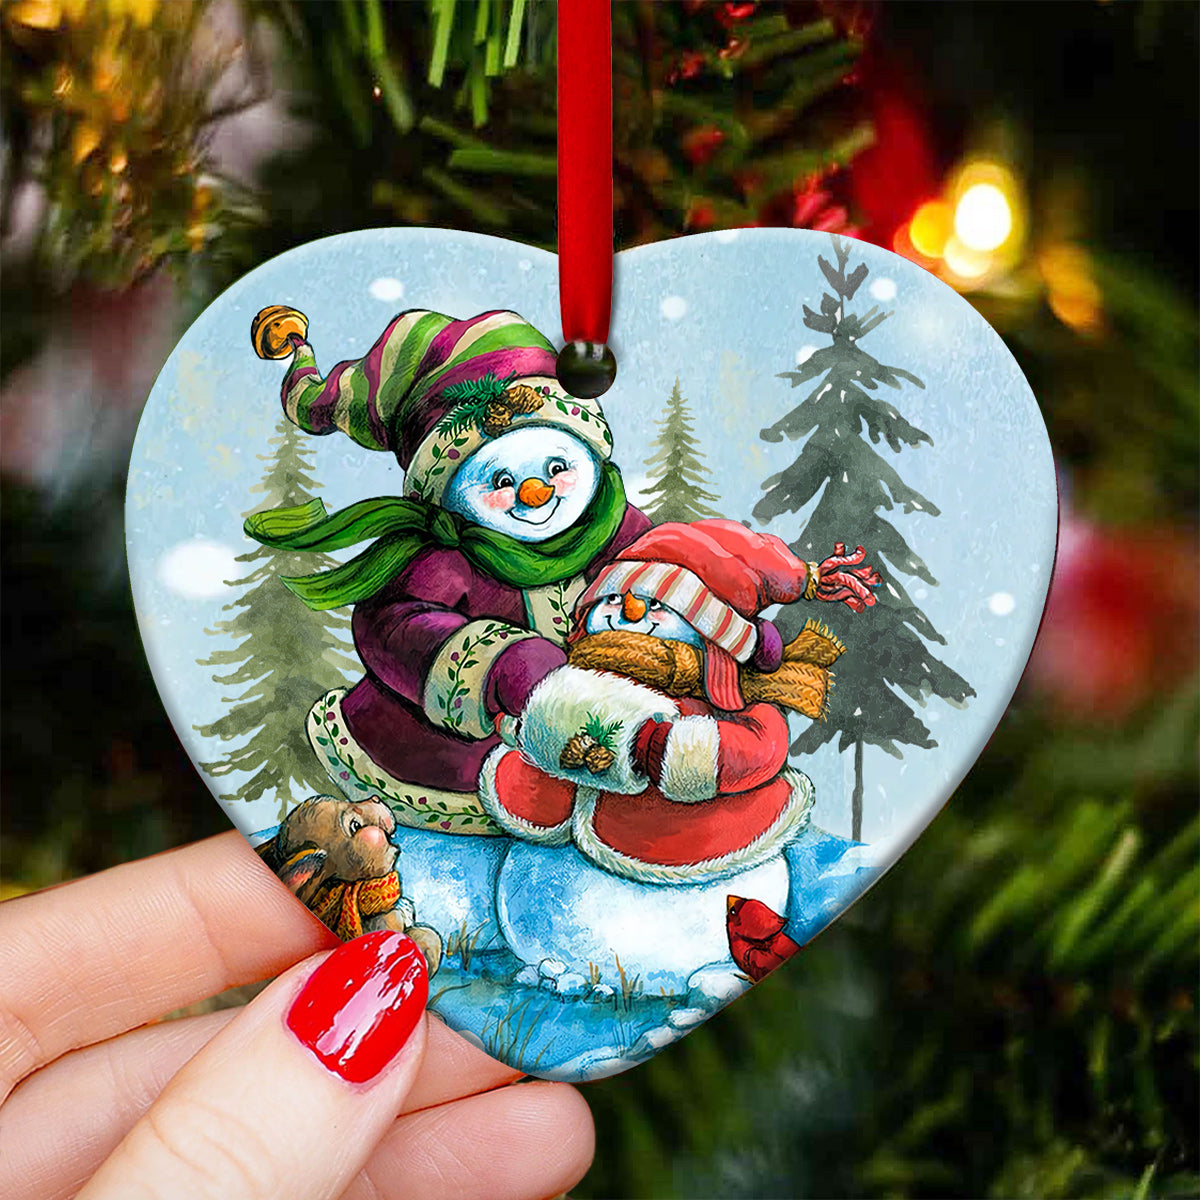 Snowman Grandmother And Granddaughter Side By Side - Heart Ornament - Owls Matrix LTD